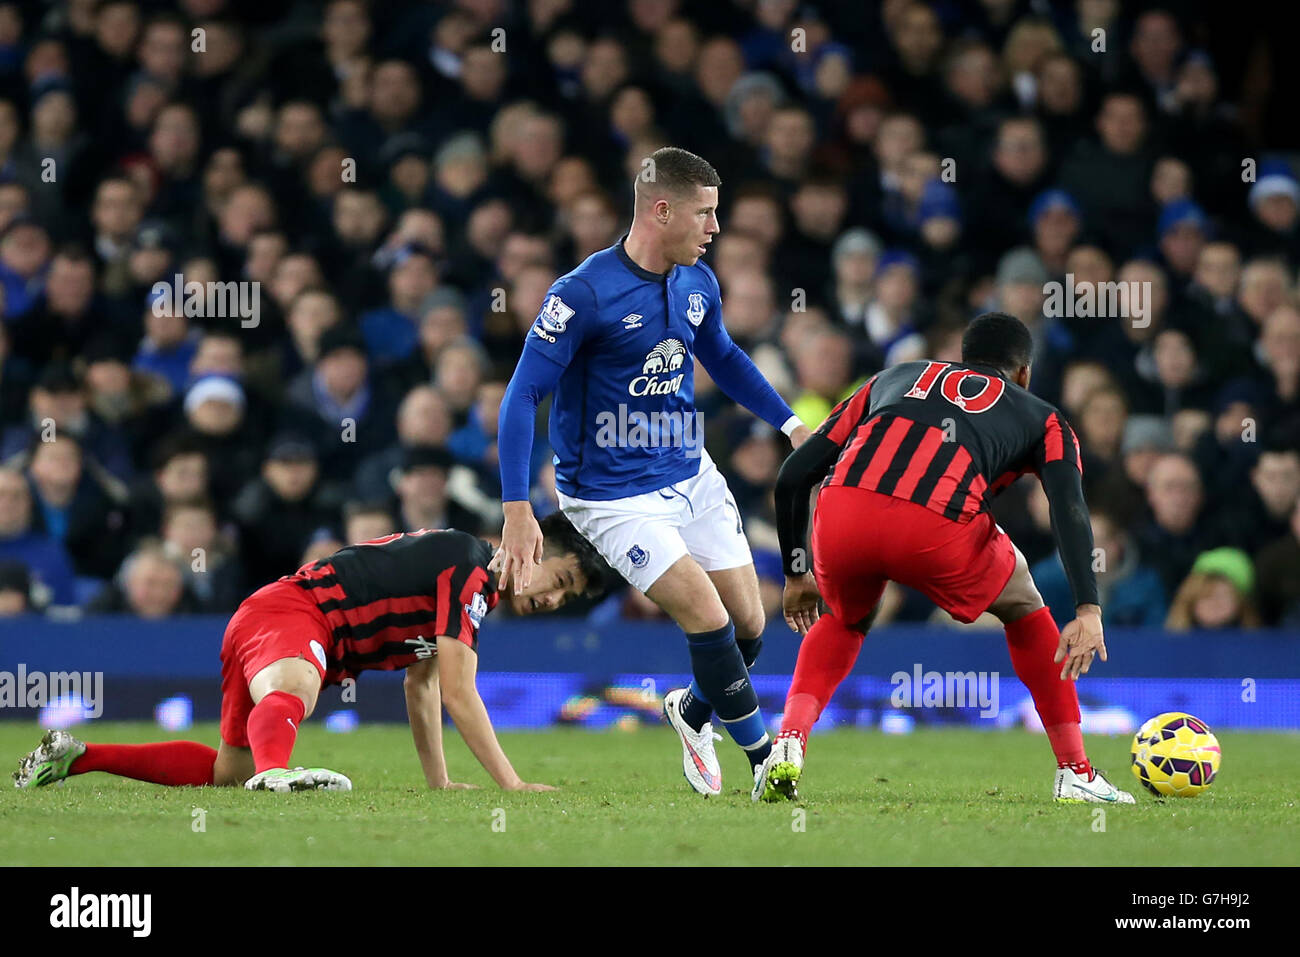 Everton's Ross Barkley (centre) in action with Queens Park Rangers' Yun Suk-Young (left) and Leroy Fer during the Barclays Premier League match at Goodison Park, Liverpool. Stock Photo